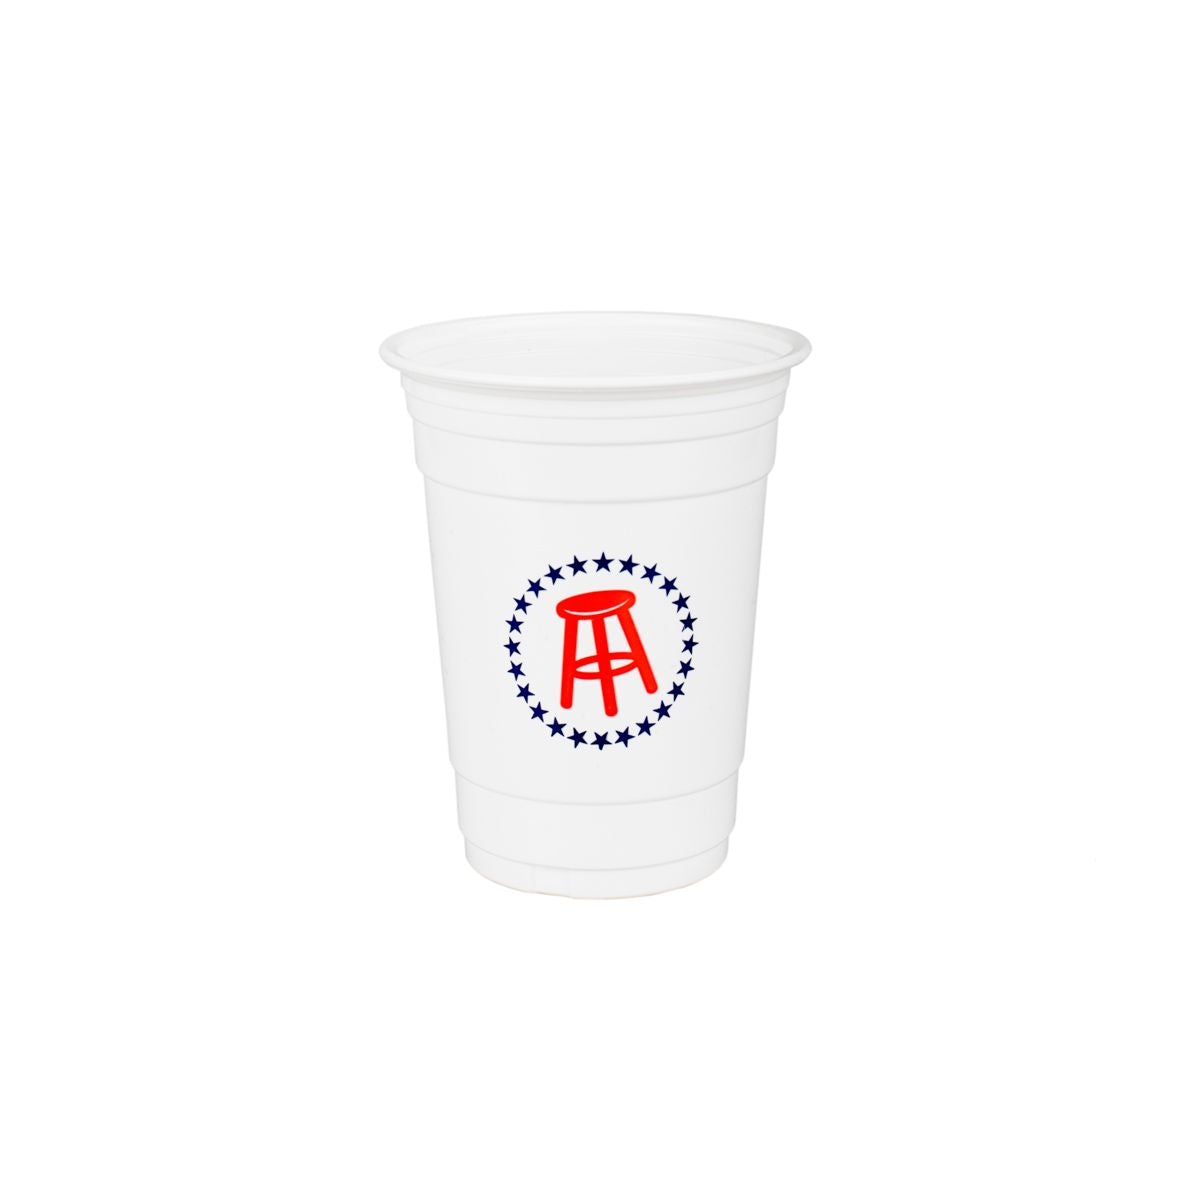 Barstool Sports Logo Party Cups - 14 Pack-Drinkware-Barstool Sports-White-One Size-Barstool Sports